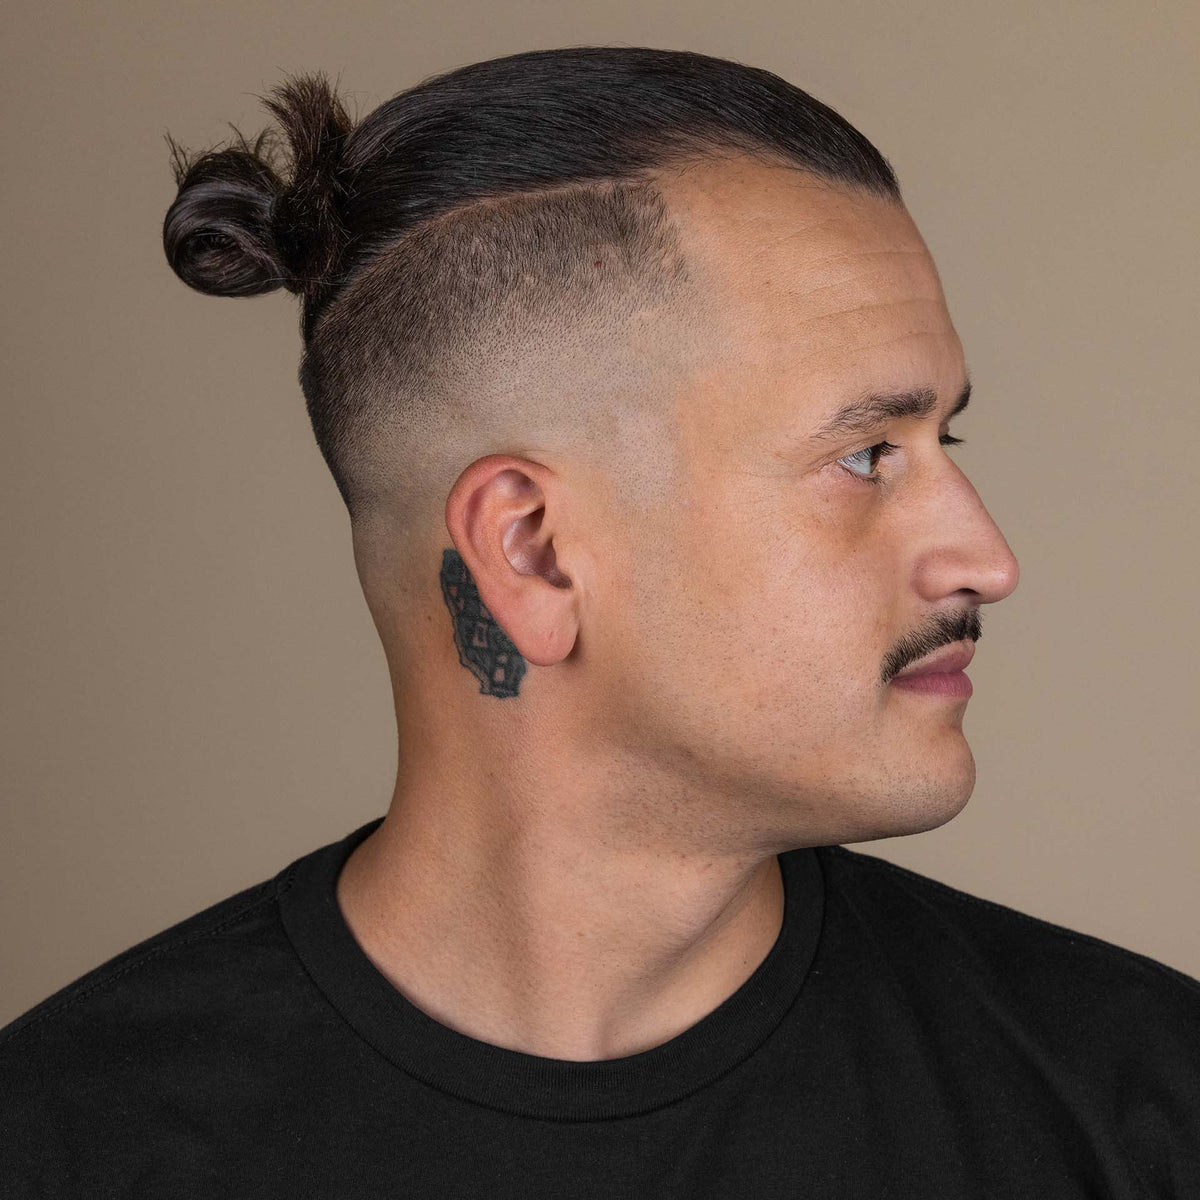 Man with hair styled with Suavecito Hair Cream